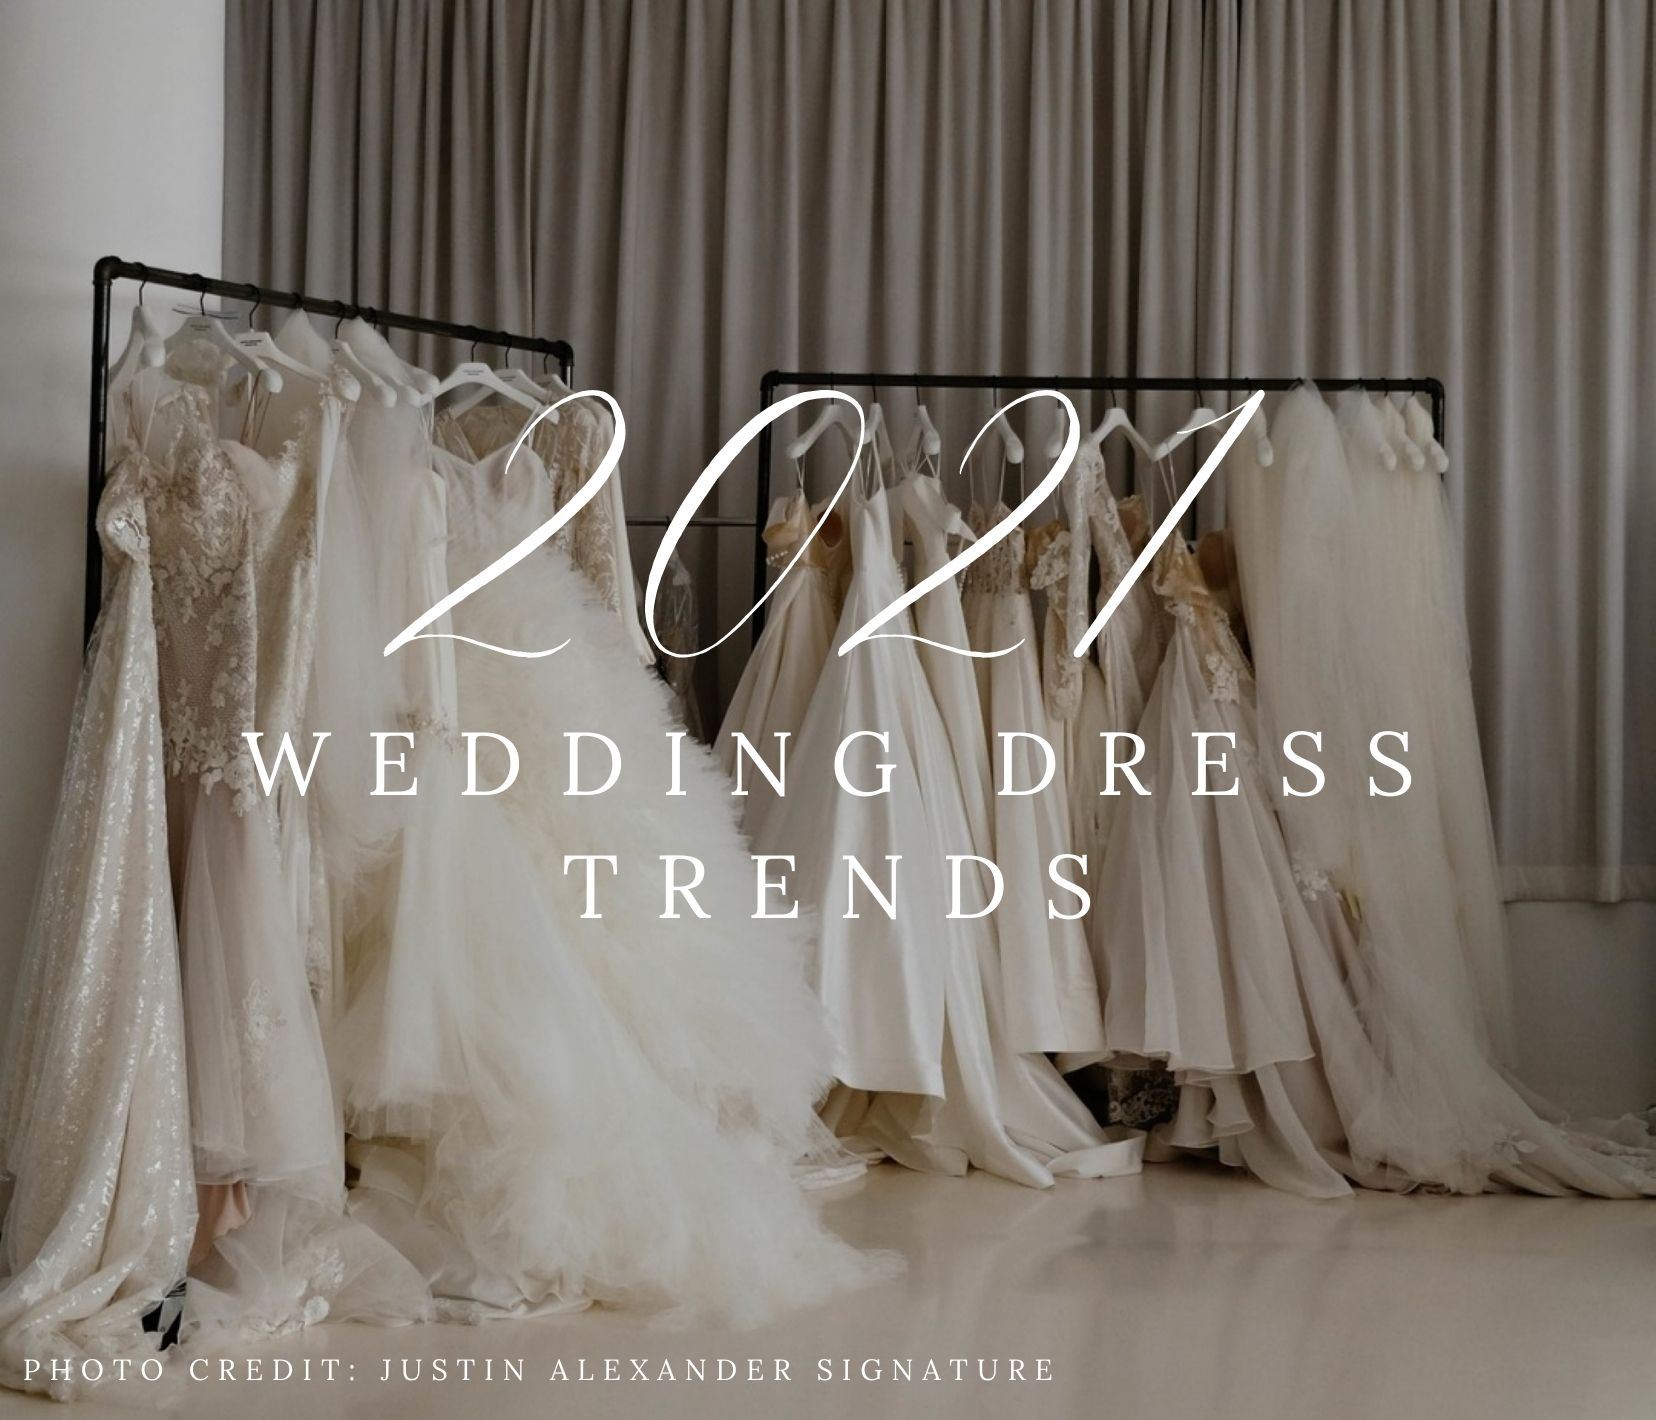 The Wedding Dress Trends To Be On The Lookout For In 2021. Desktop Image